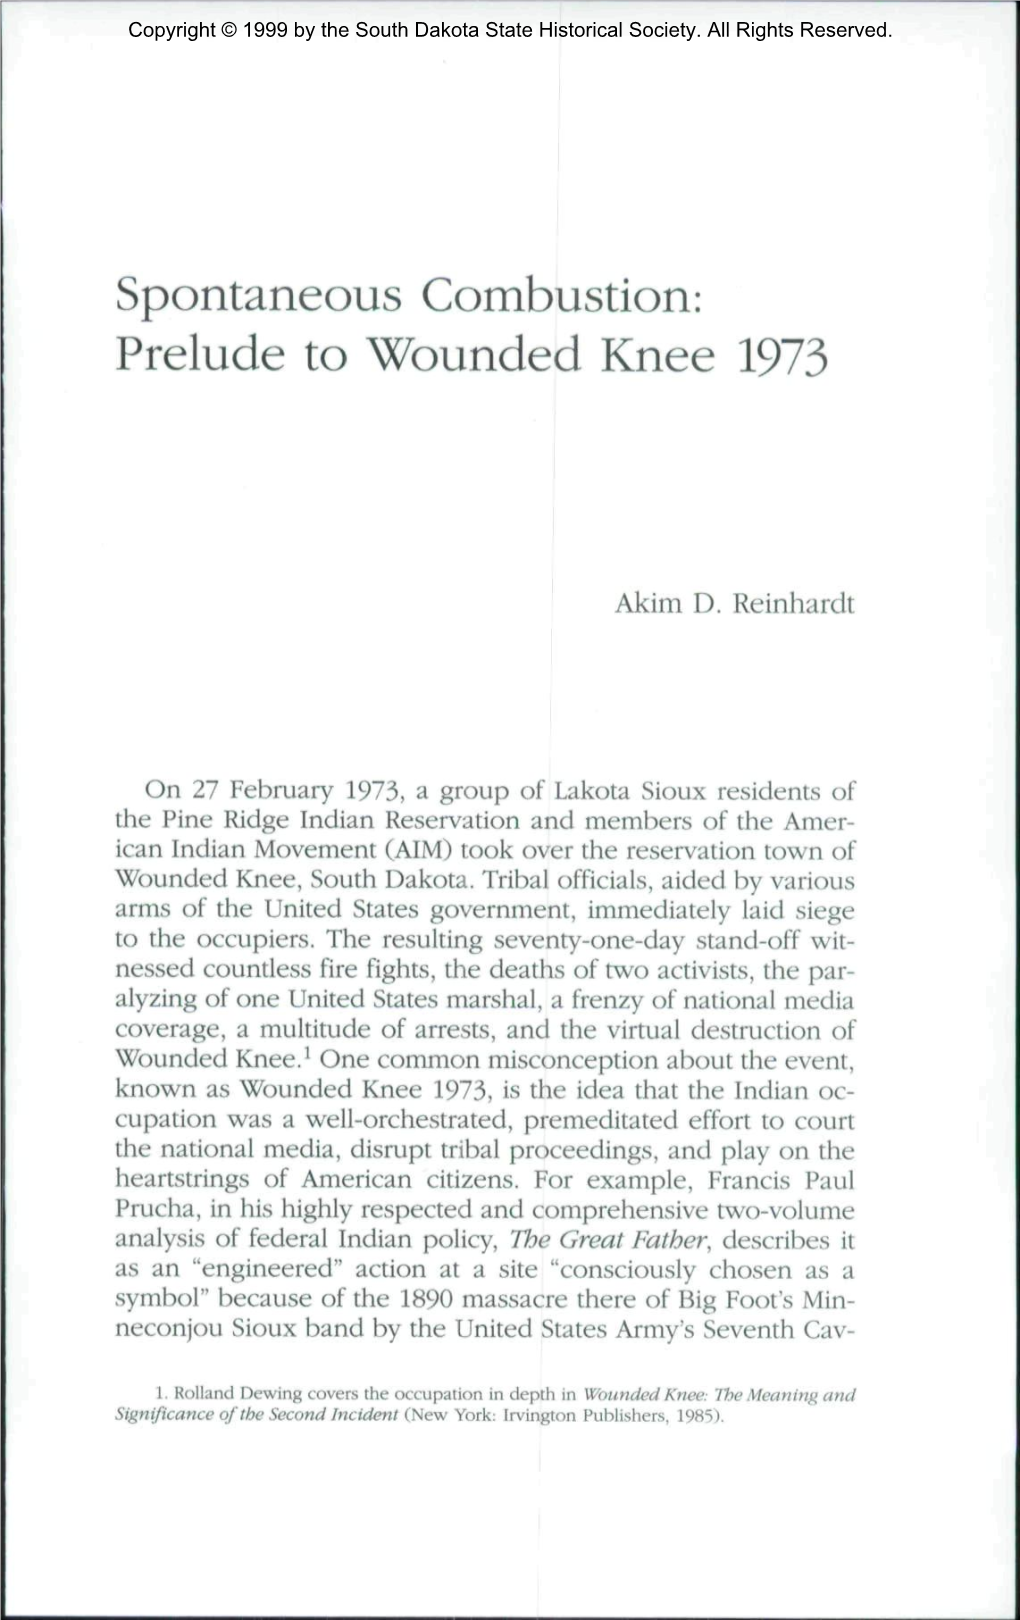 Spontaneous Combustion: Prelude to Wounded Knee 1973